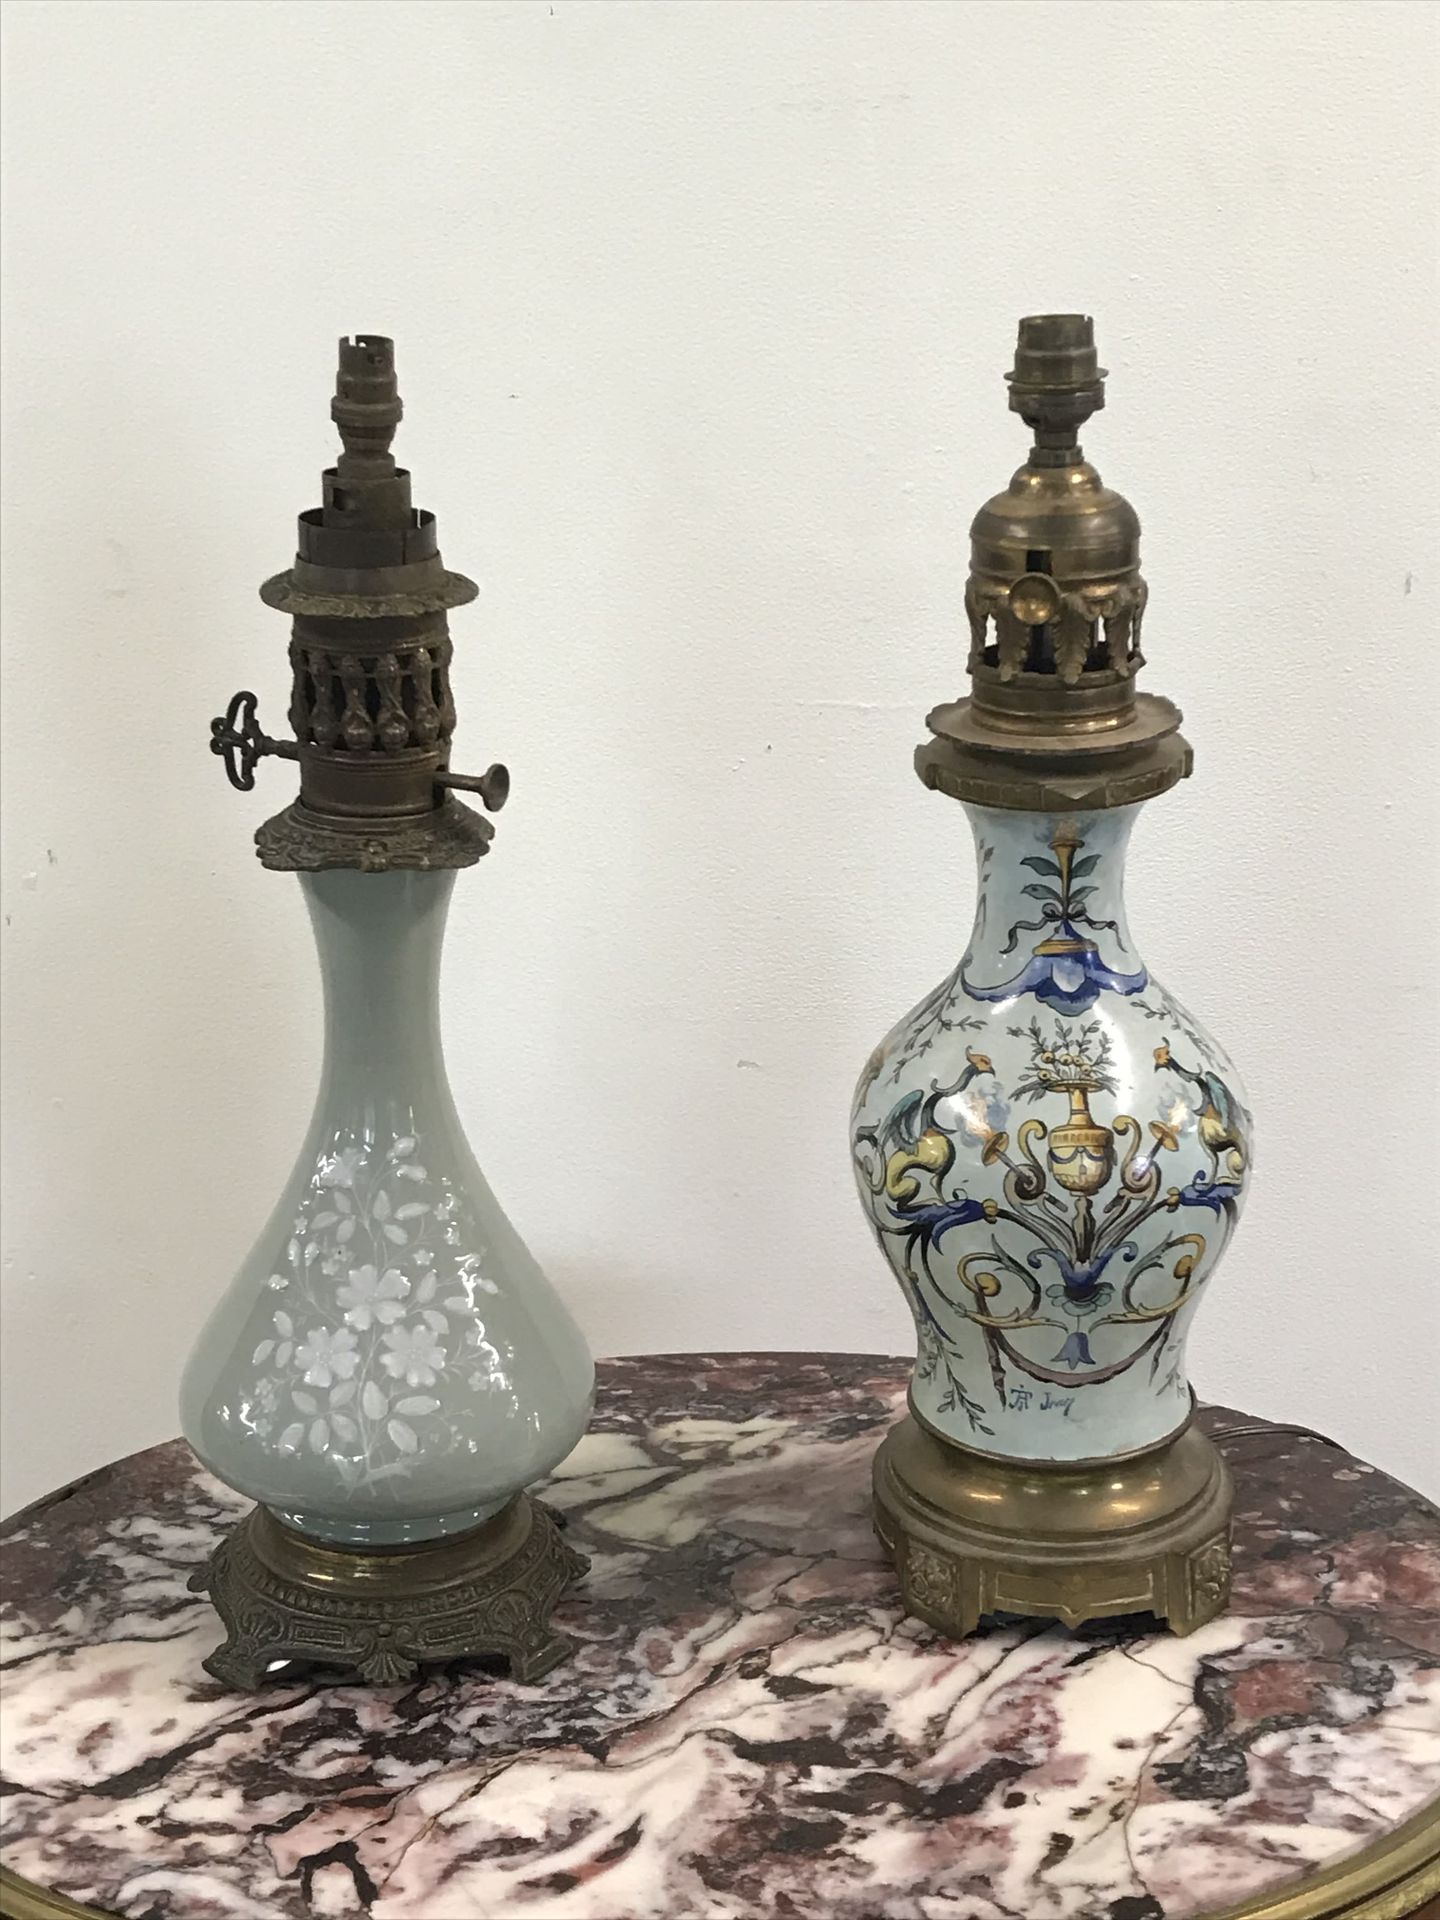 Null PETROL LAMP 

In enamelled earthenware with Renaissance style decoration of&hellip;